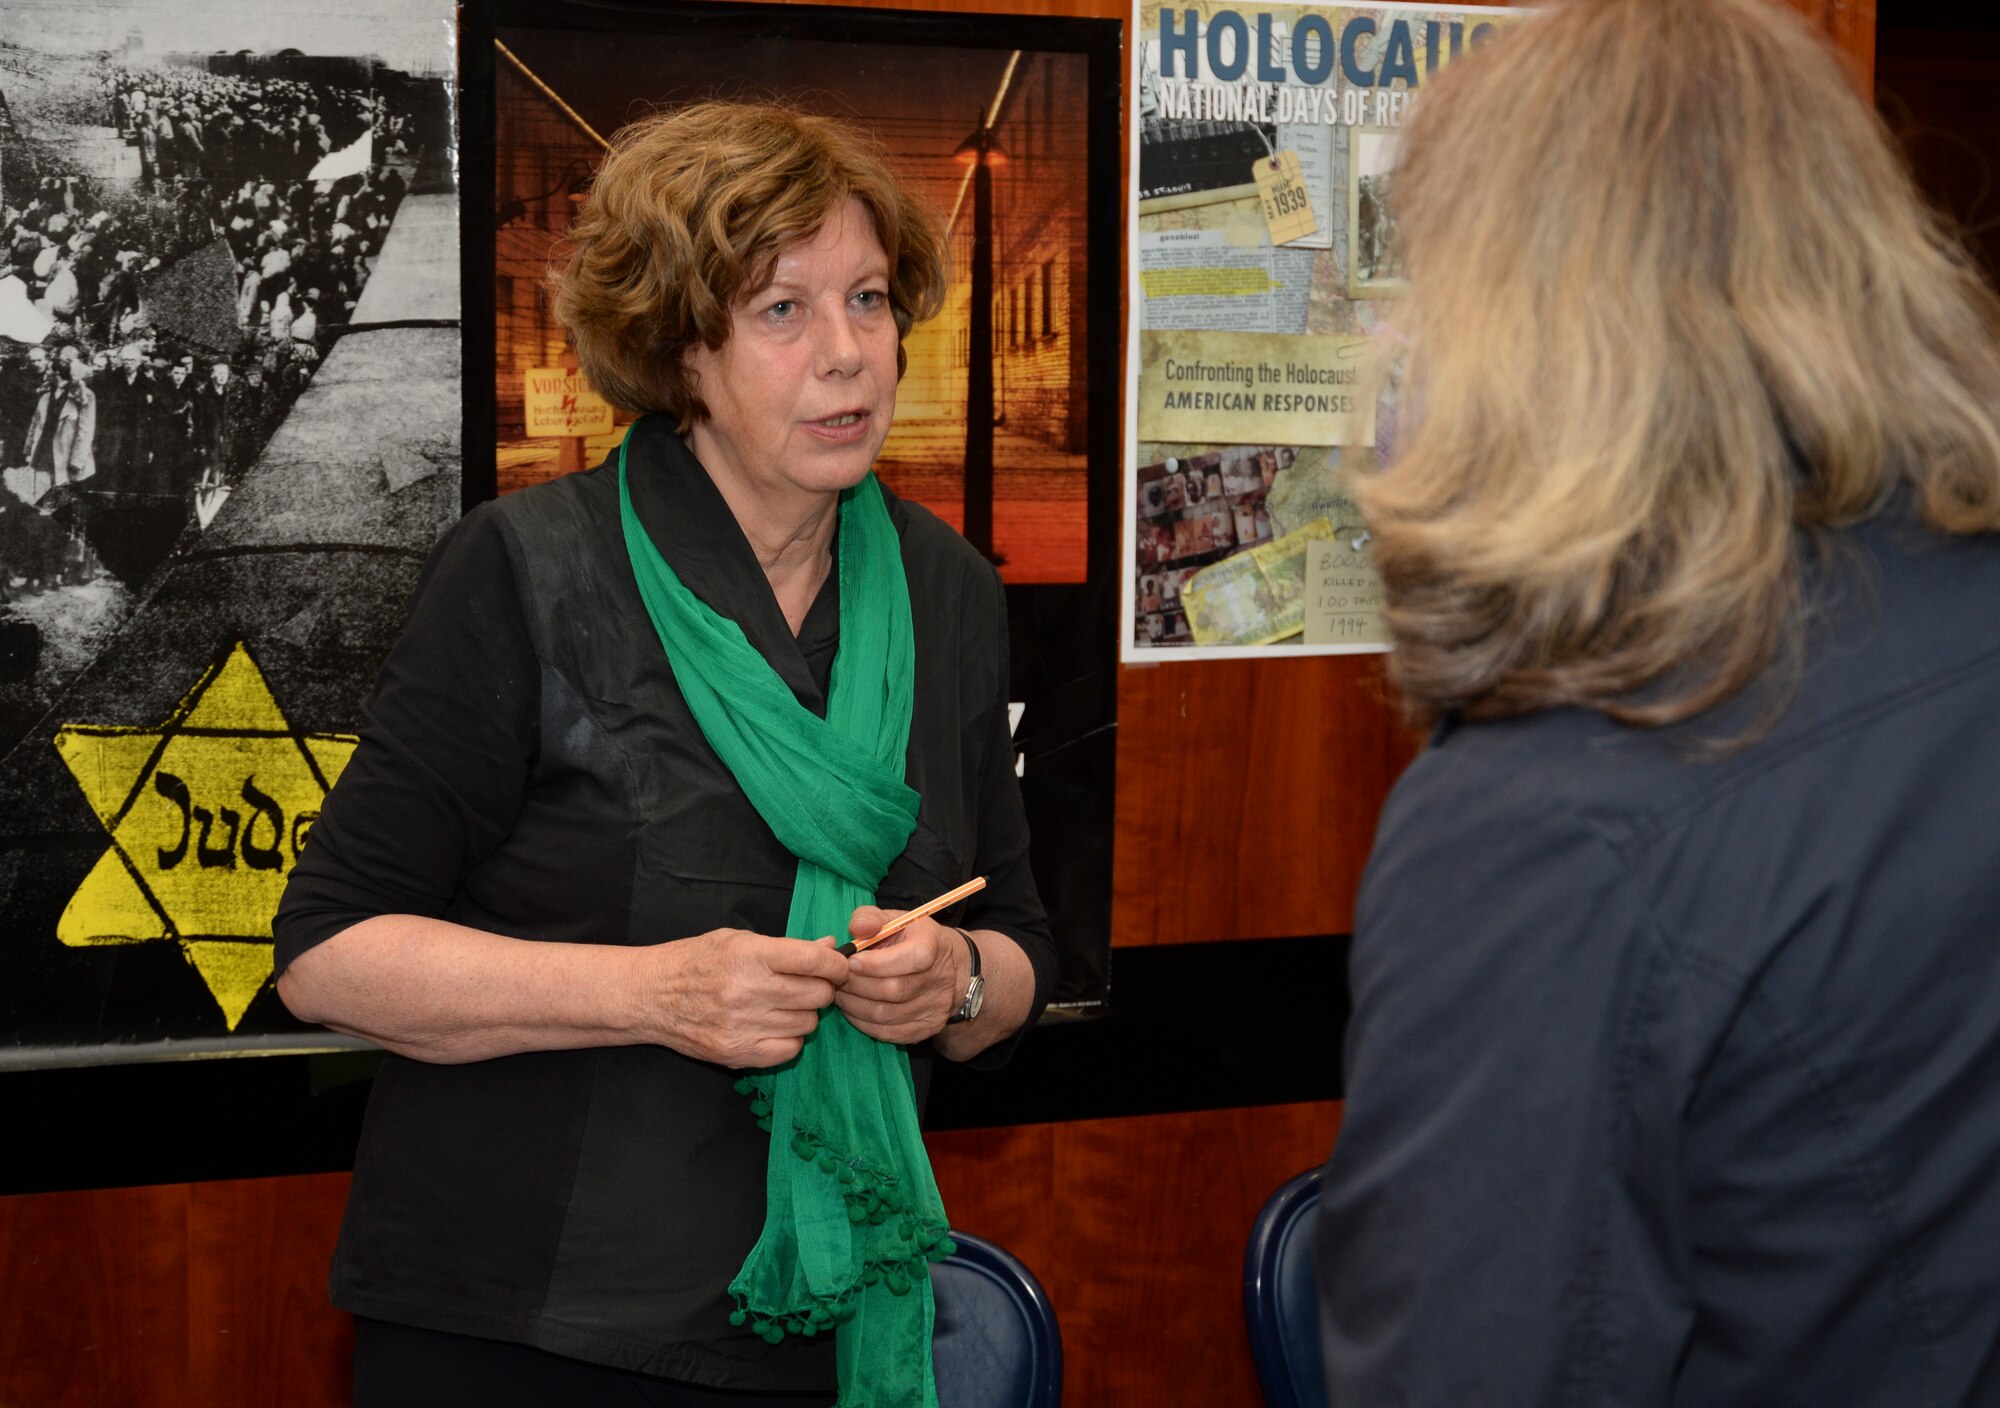 Anna Andlauer, an educator from Markt Indersdorf, Germany, speaks with a spectator as part of the Diversity Day celebration at Club Eifel at Spangdahlem Air Base, Germany, Aug. 25, 2014. The Diversity Day event included presentations like Andlauer’s on displaced child survivors of the Holocaust to demonstrate the need for respect and appreciation for all cultures. (U.S. Air Force photo by Staff Sgt. Joe W. McFadden/Released)